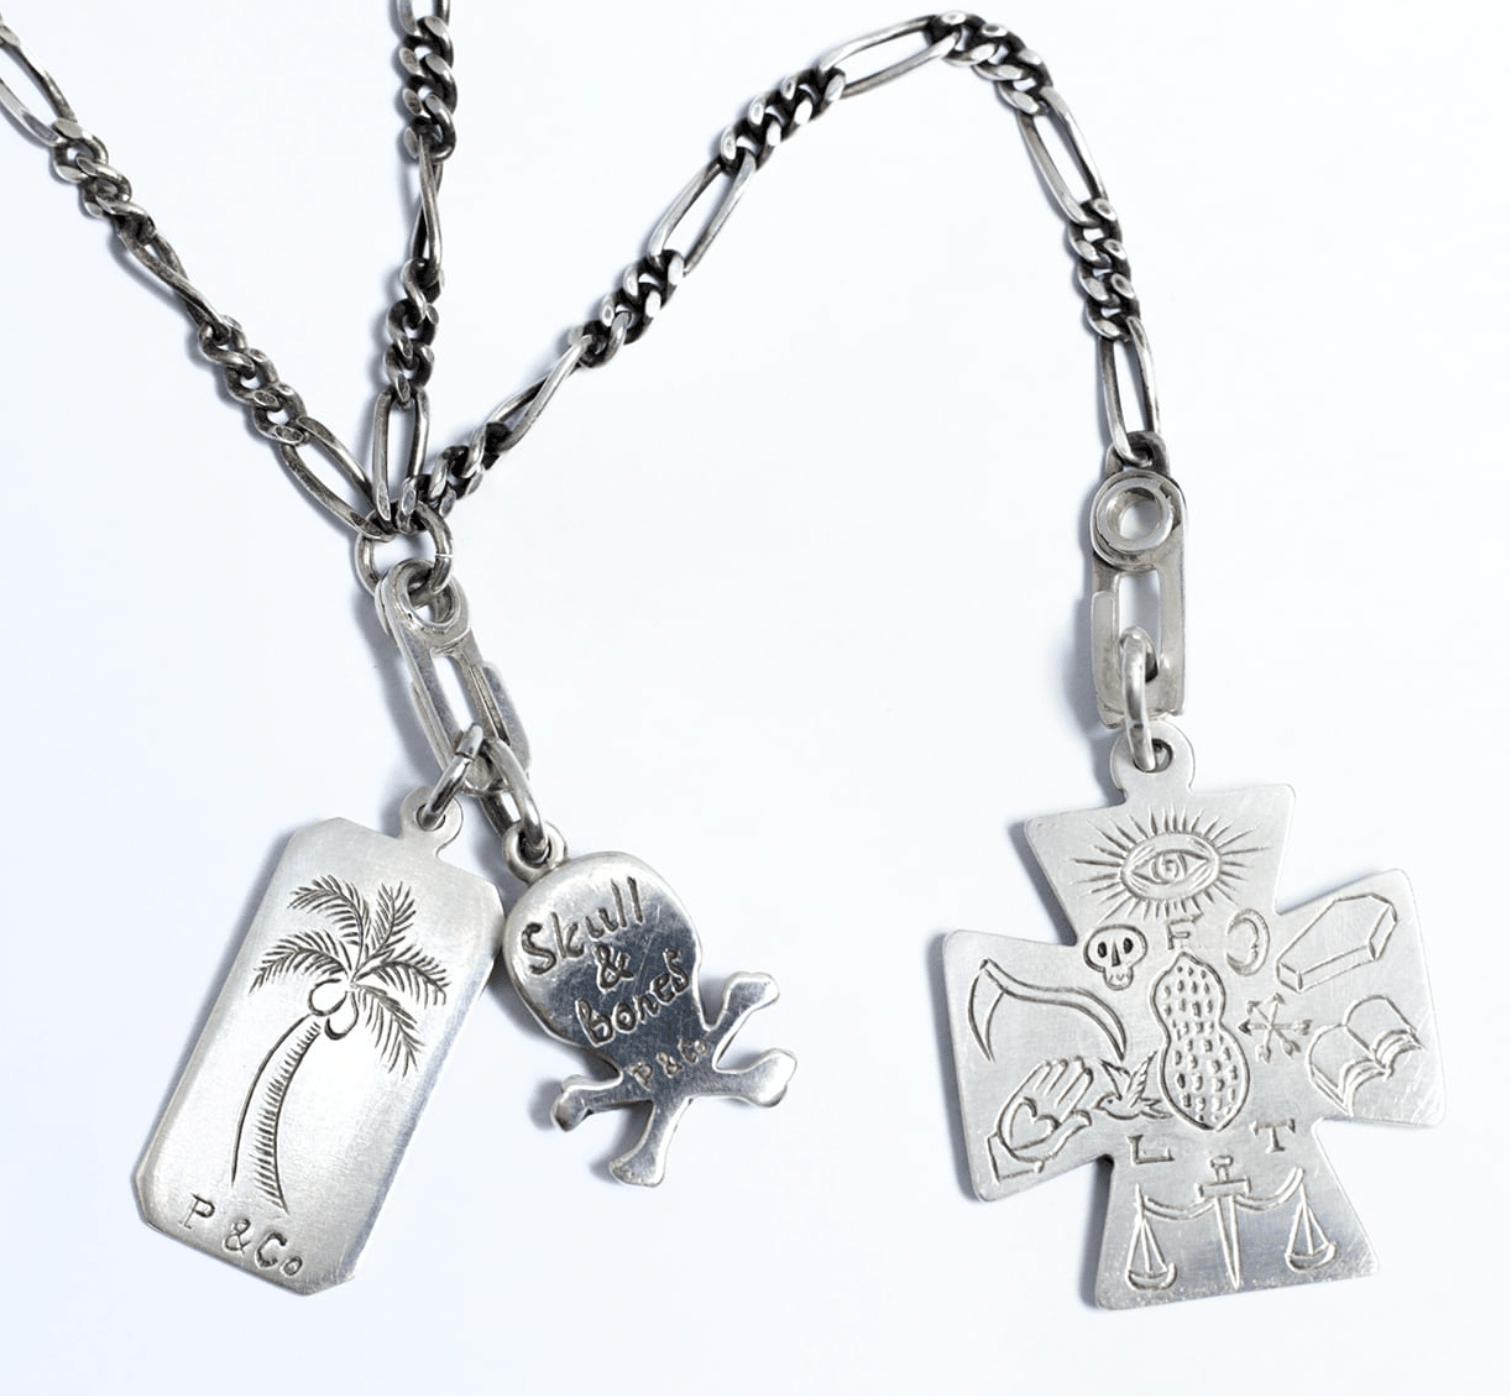 Image showing the Peanuts & Co MASONIC Chain - Silver which is a Jewellery described by the following info Accessories, Jewellery, Peanuts & Co, Released and sold on the IRON HEART GERMANY online store